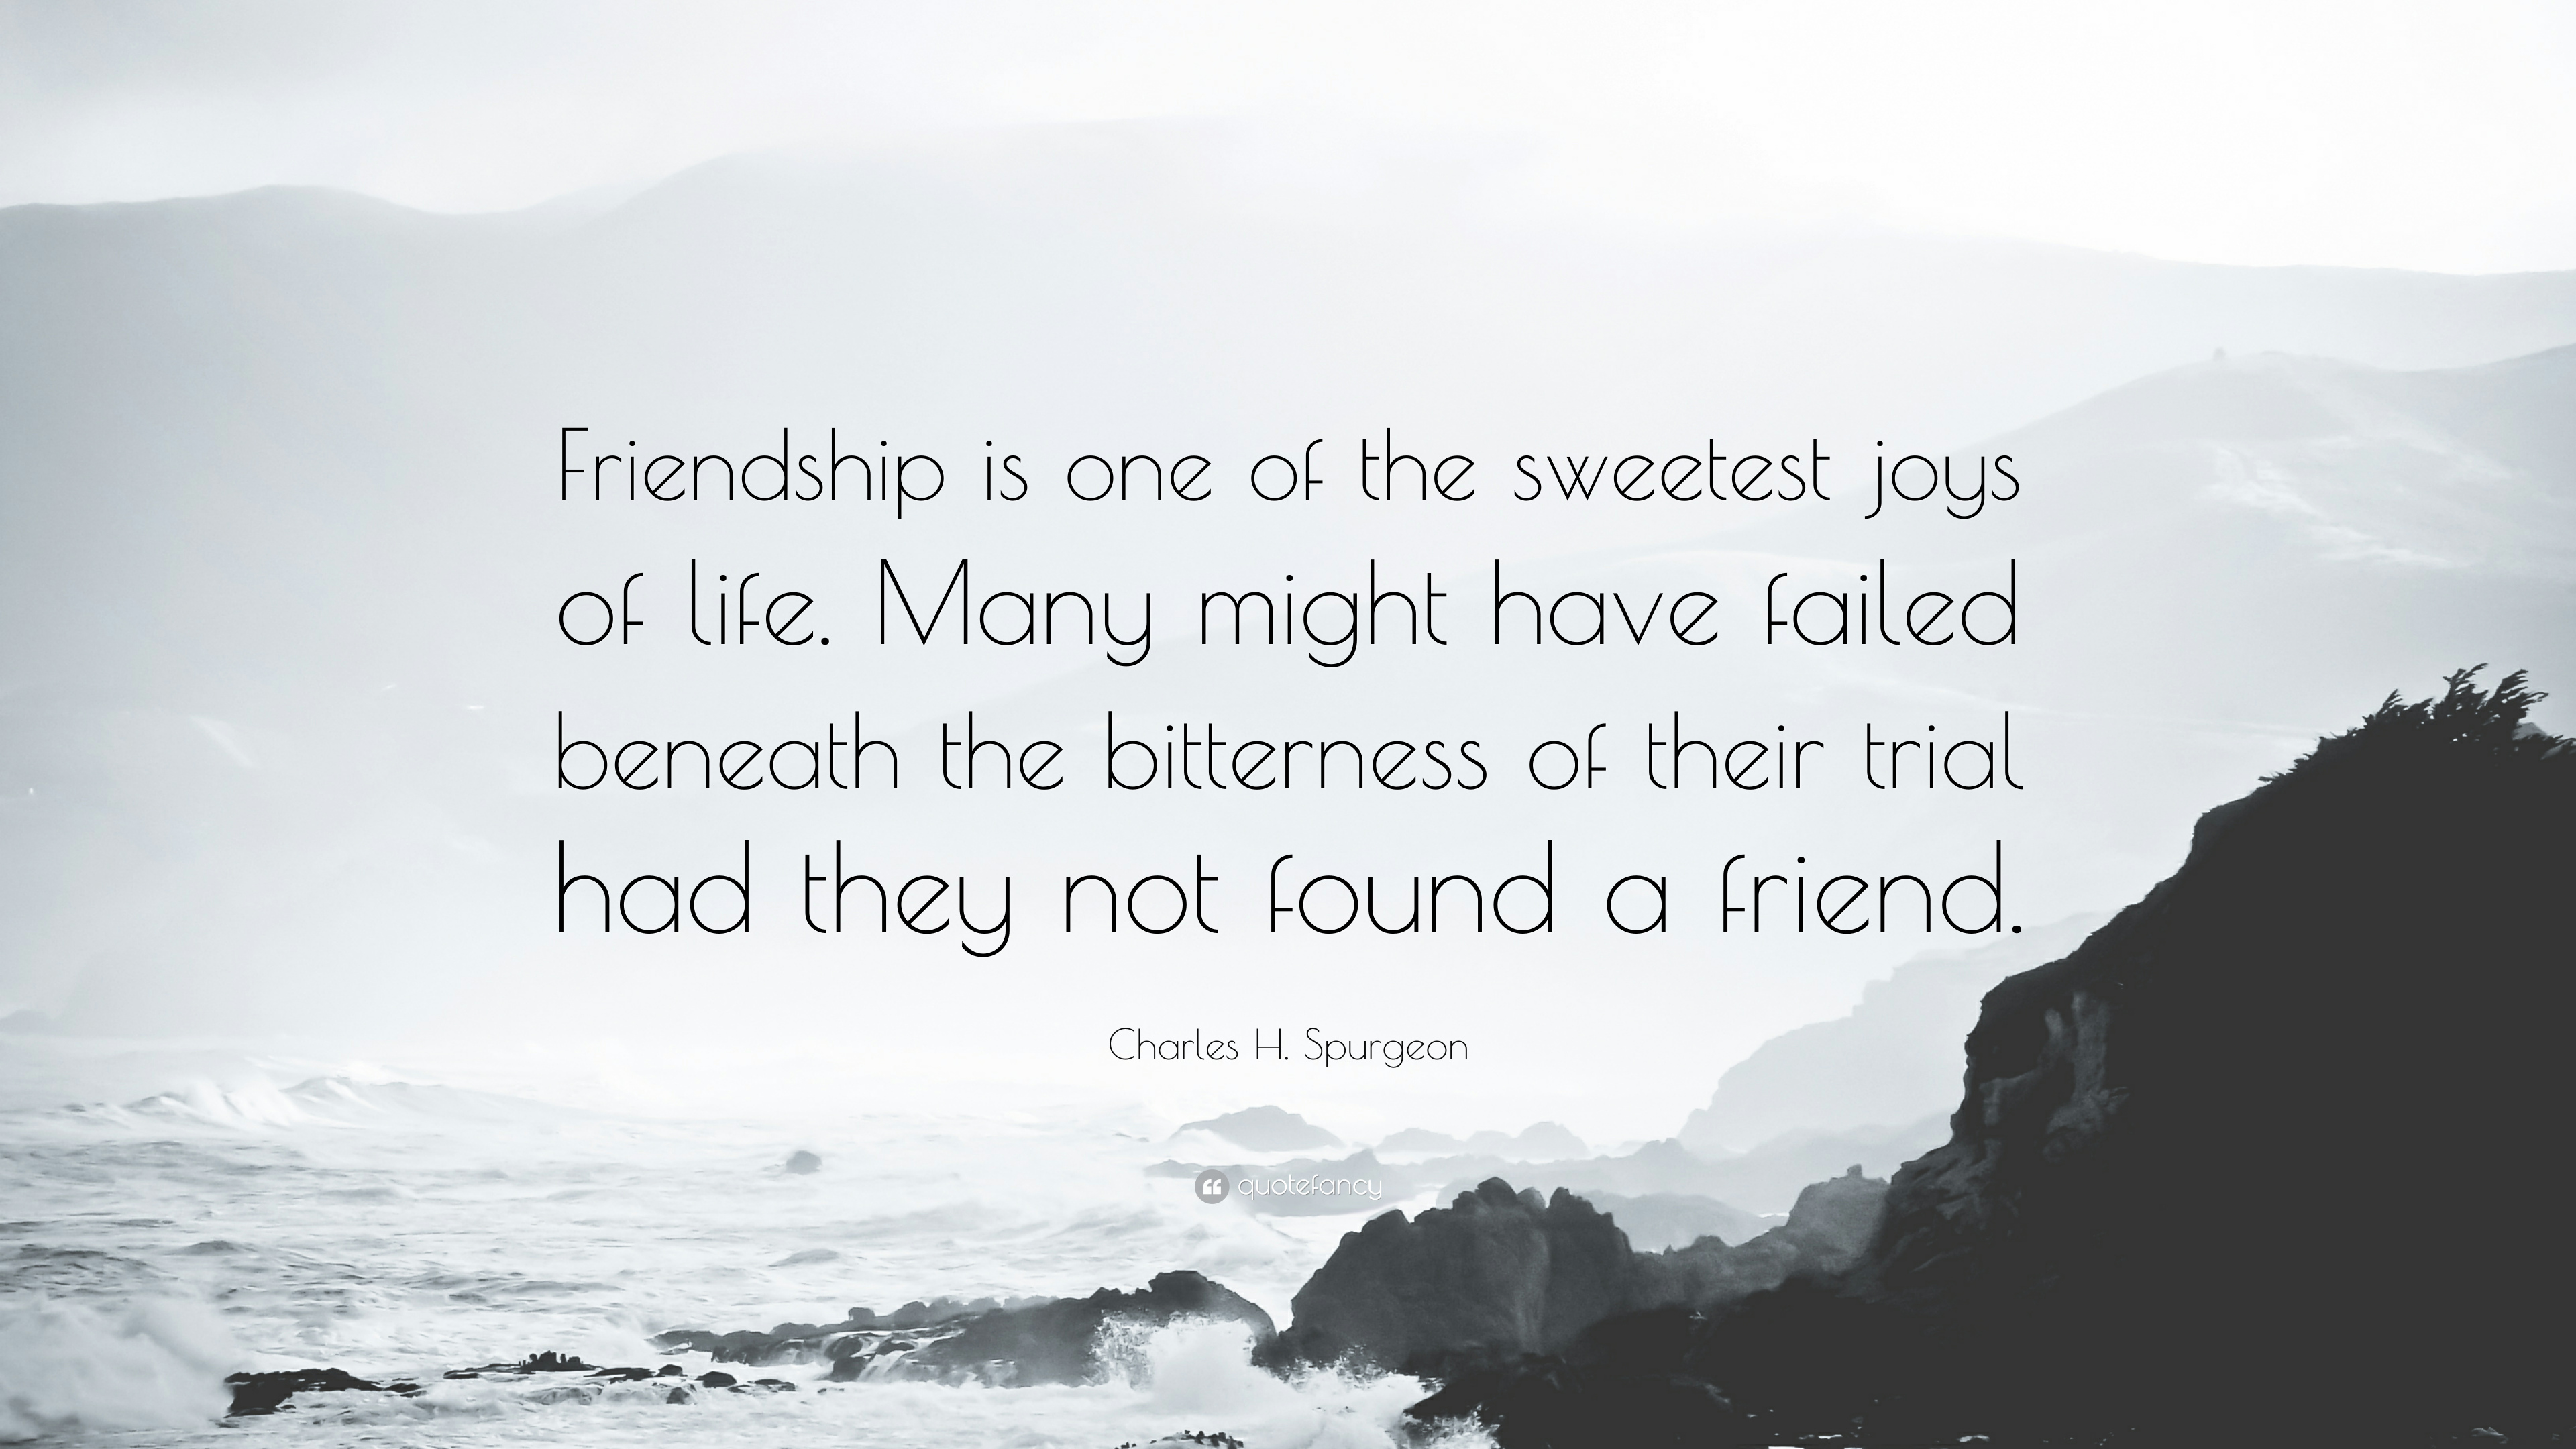 Charles H. Spurgeon Quote: “Friendship is one of the sweetest joys ...